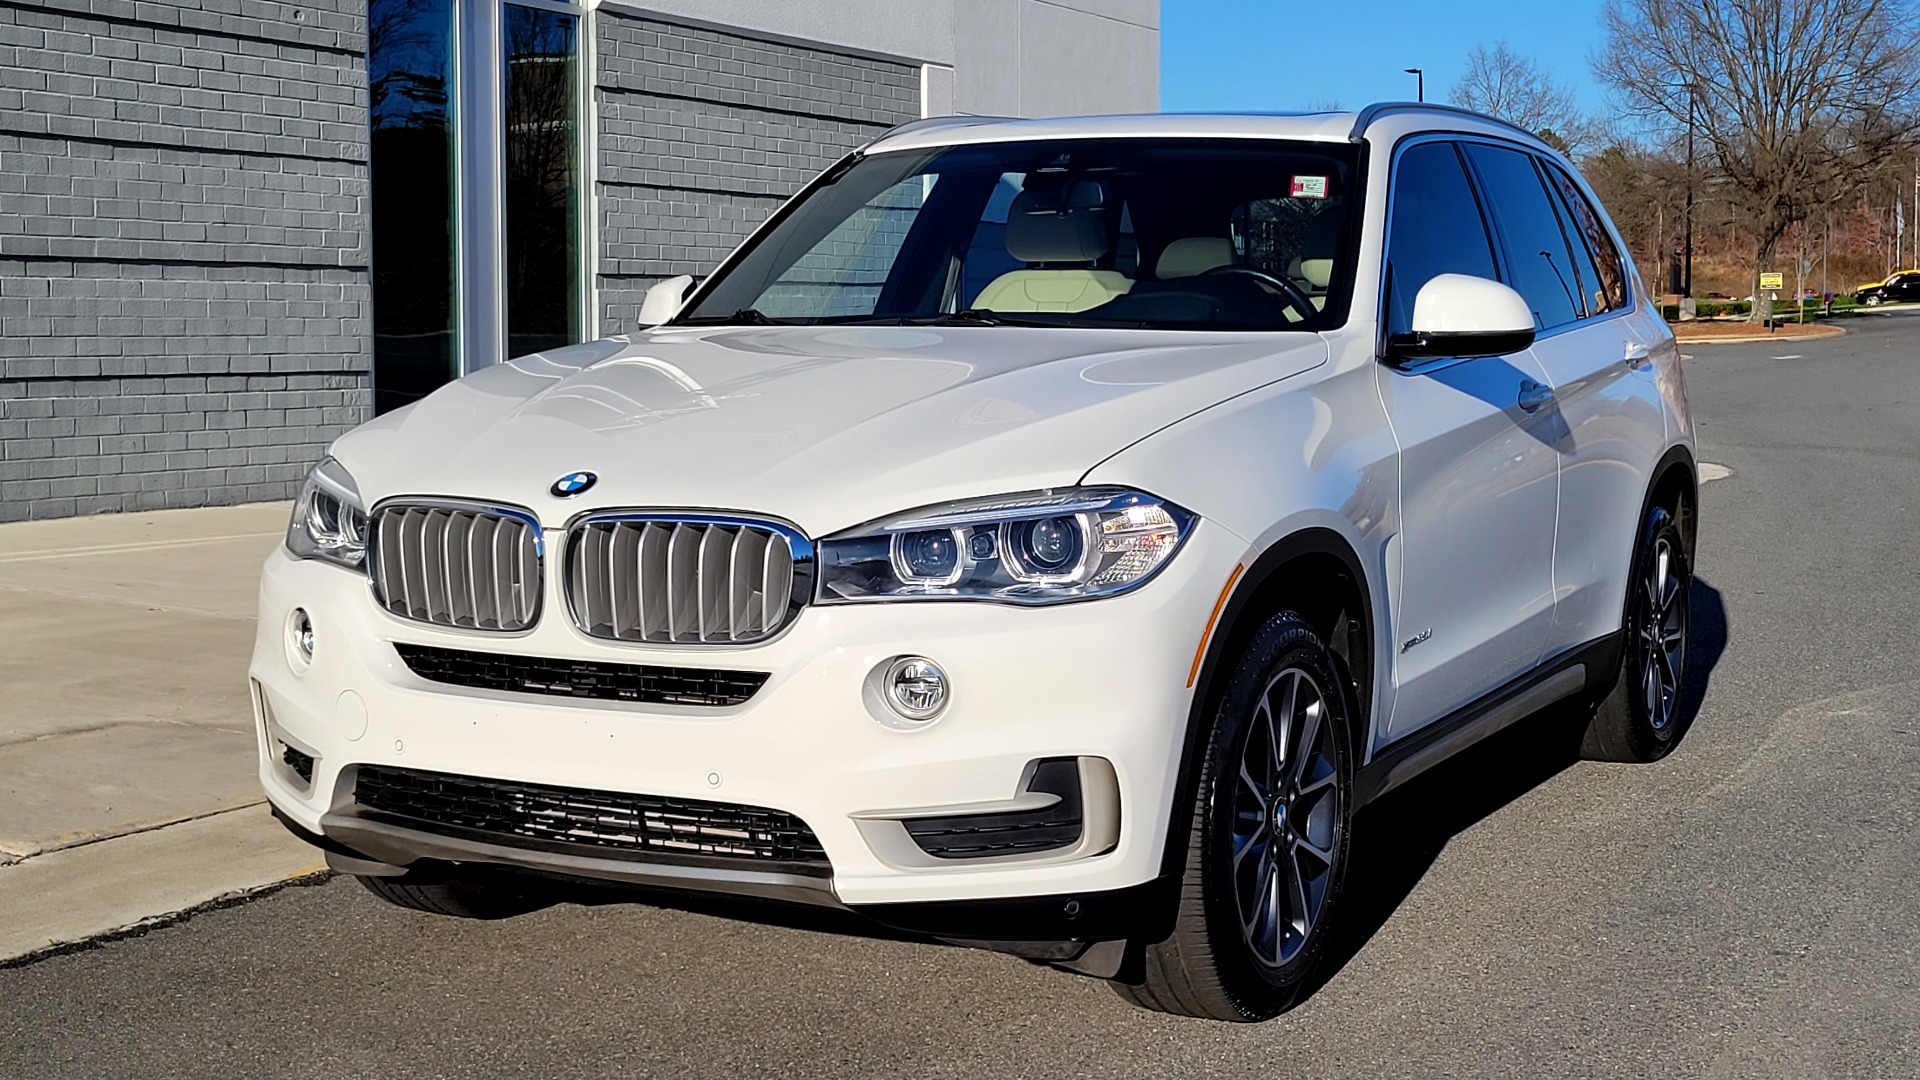 Used 2018 BMW X5 XDRIVE35I PREMIUM / DRVR ASST / HUD / WIRELESS CHARGING / HTD ST for sale $46,795 at Formula Imports in Charlotte NC 28227 2